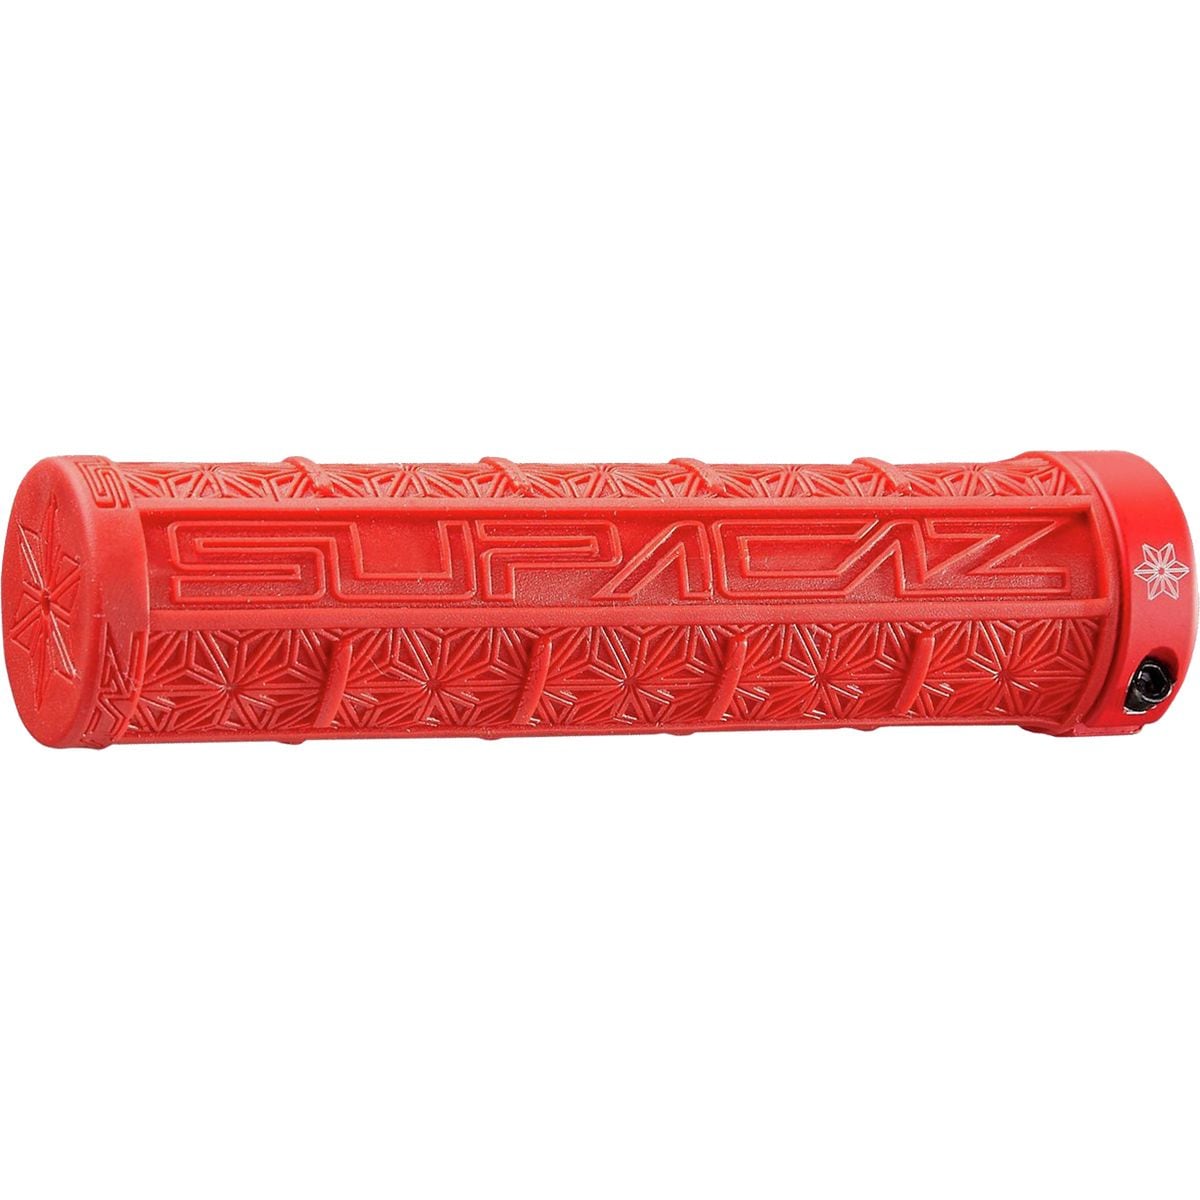 Supacaz Grizips Grips Red, Red Star Ringz, 32mm